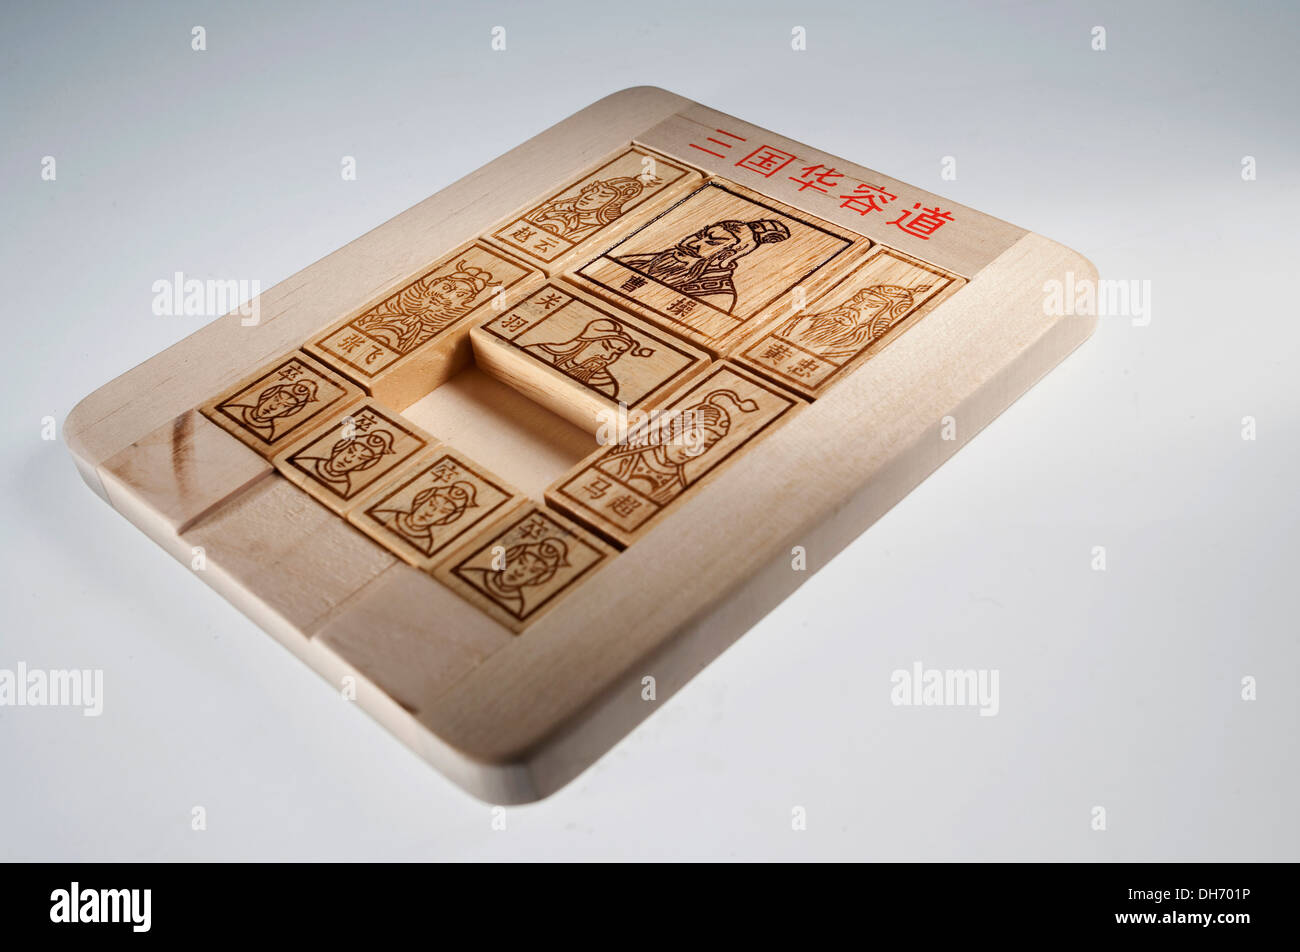 Chinesisches Puzzle, Hua Rong Dao Stockfoto